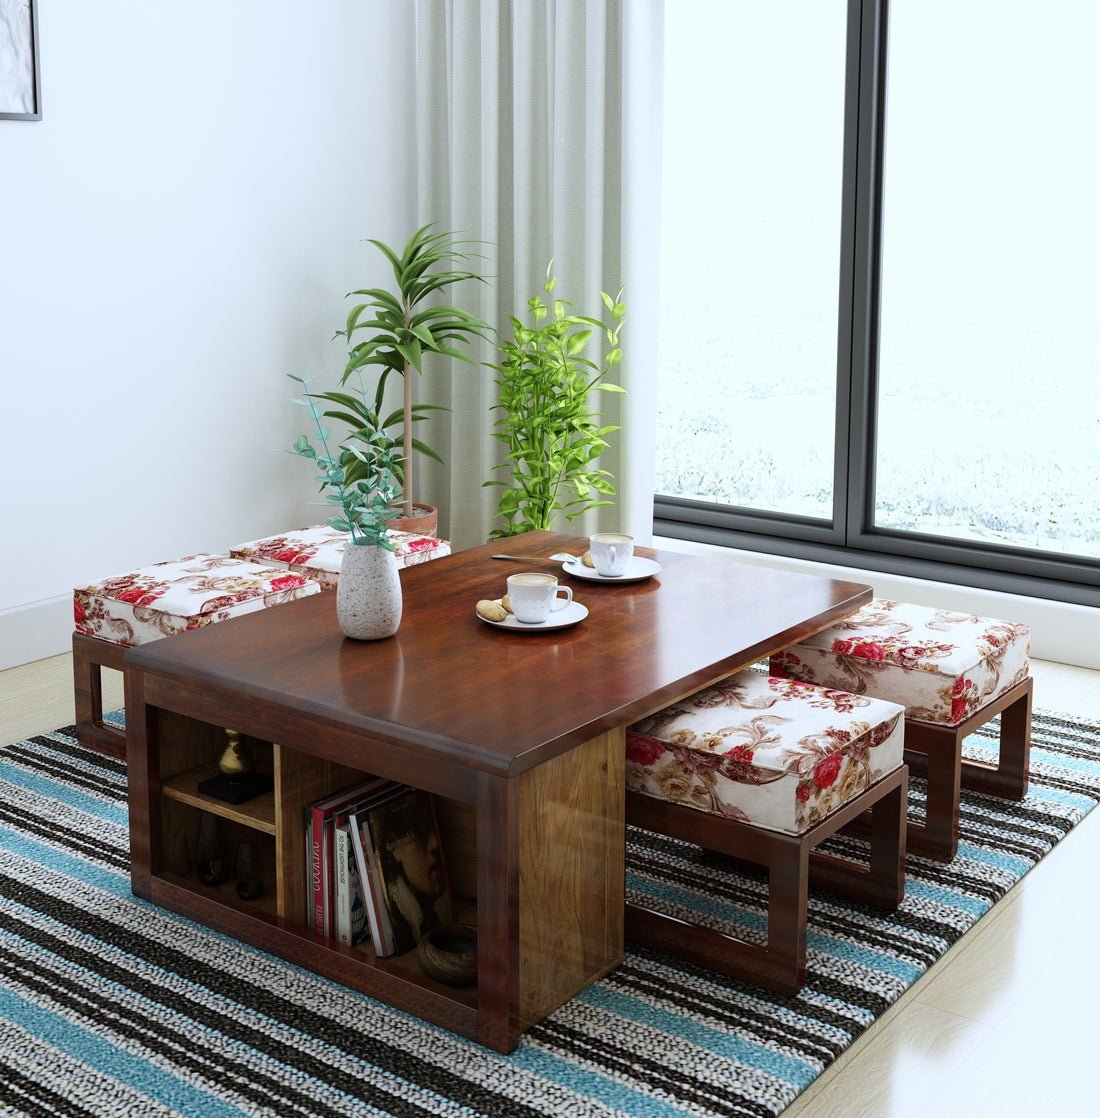 Vesta Solid Wood Coffee Table Centre Table With 4 Seating Stool For Living Room. - Torque India